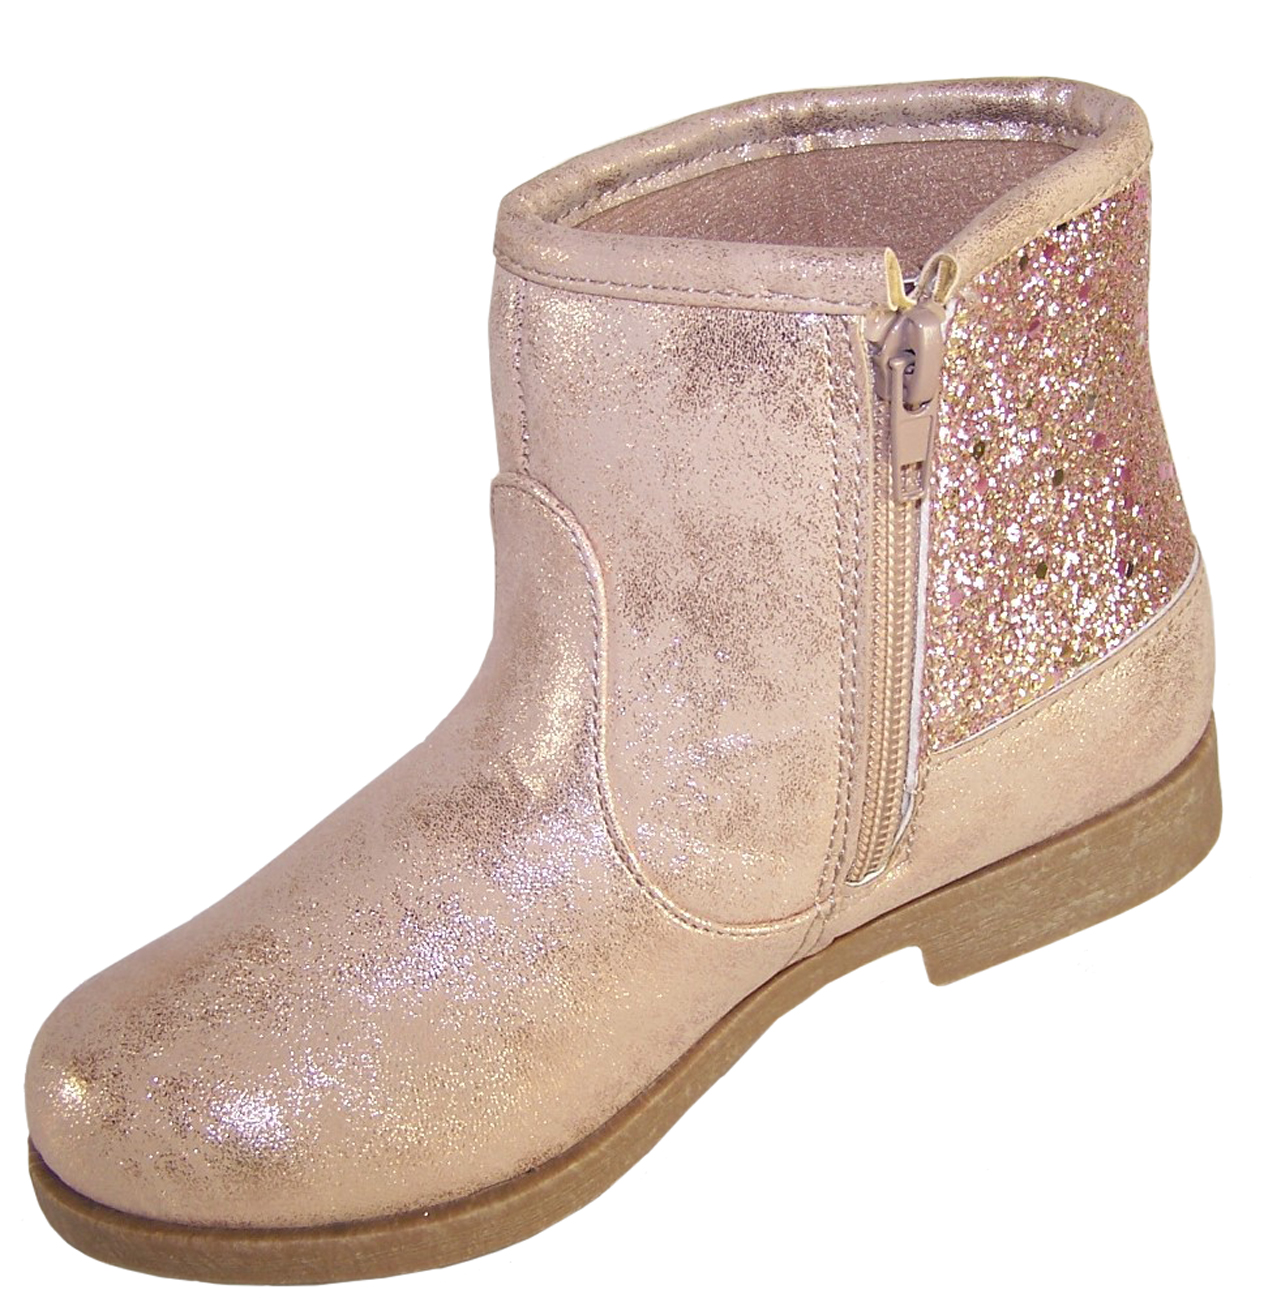 Girls sparkly pink Unicorn ankle boots-5910